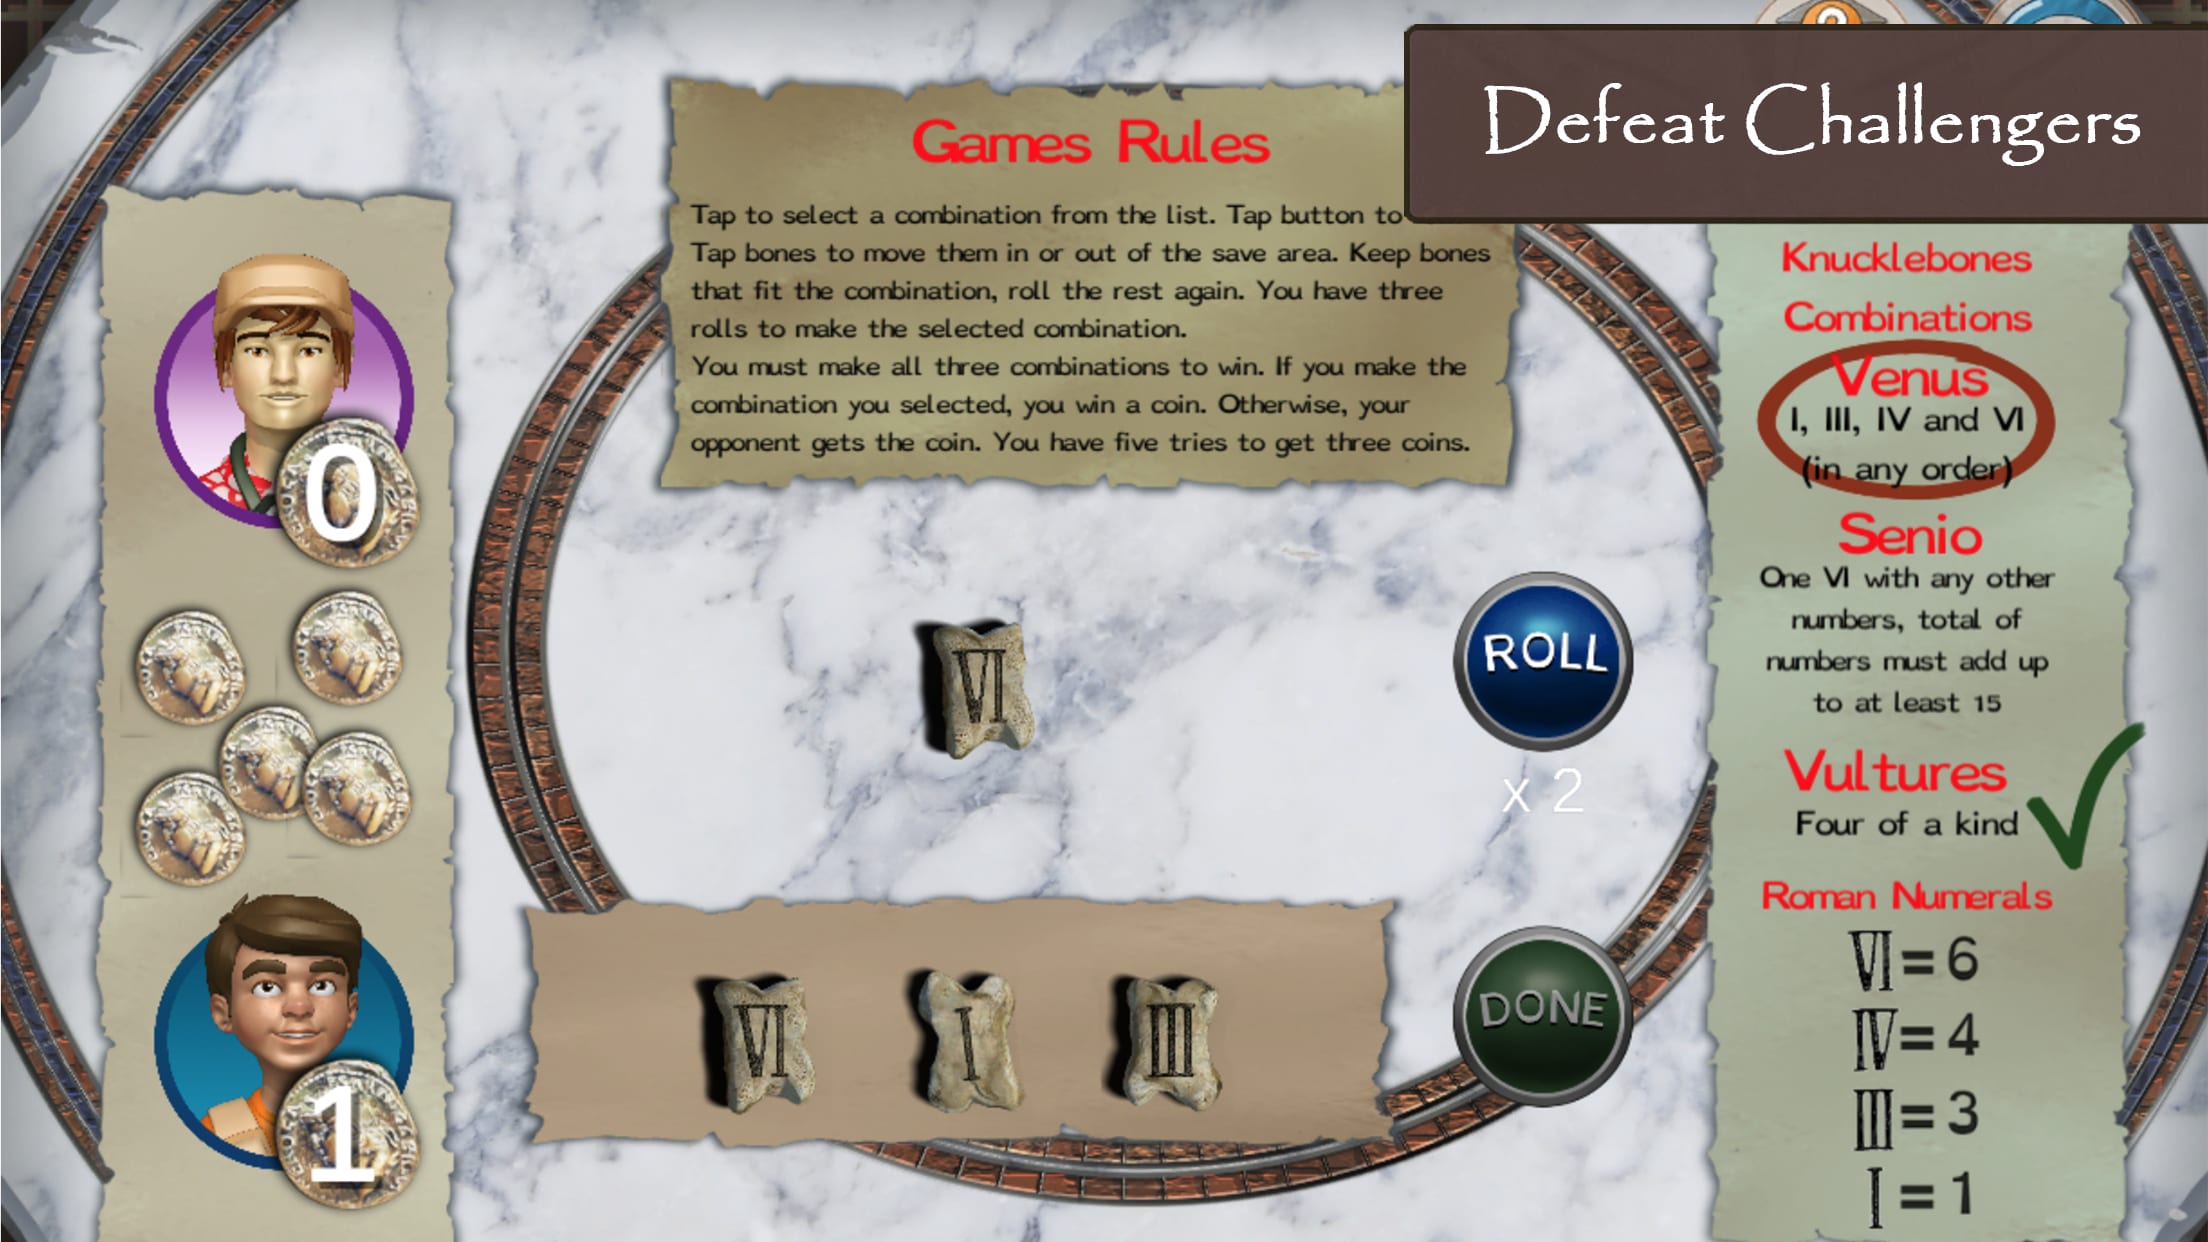 Roman Town 2 features a lot of history games based on real Roman games